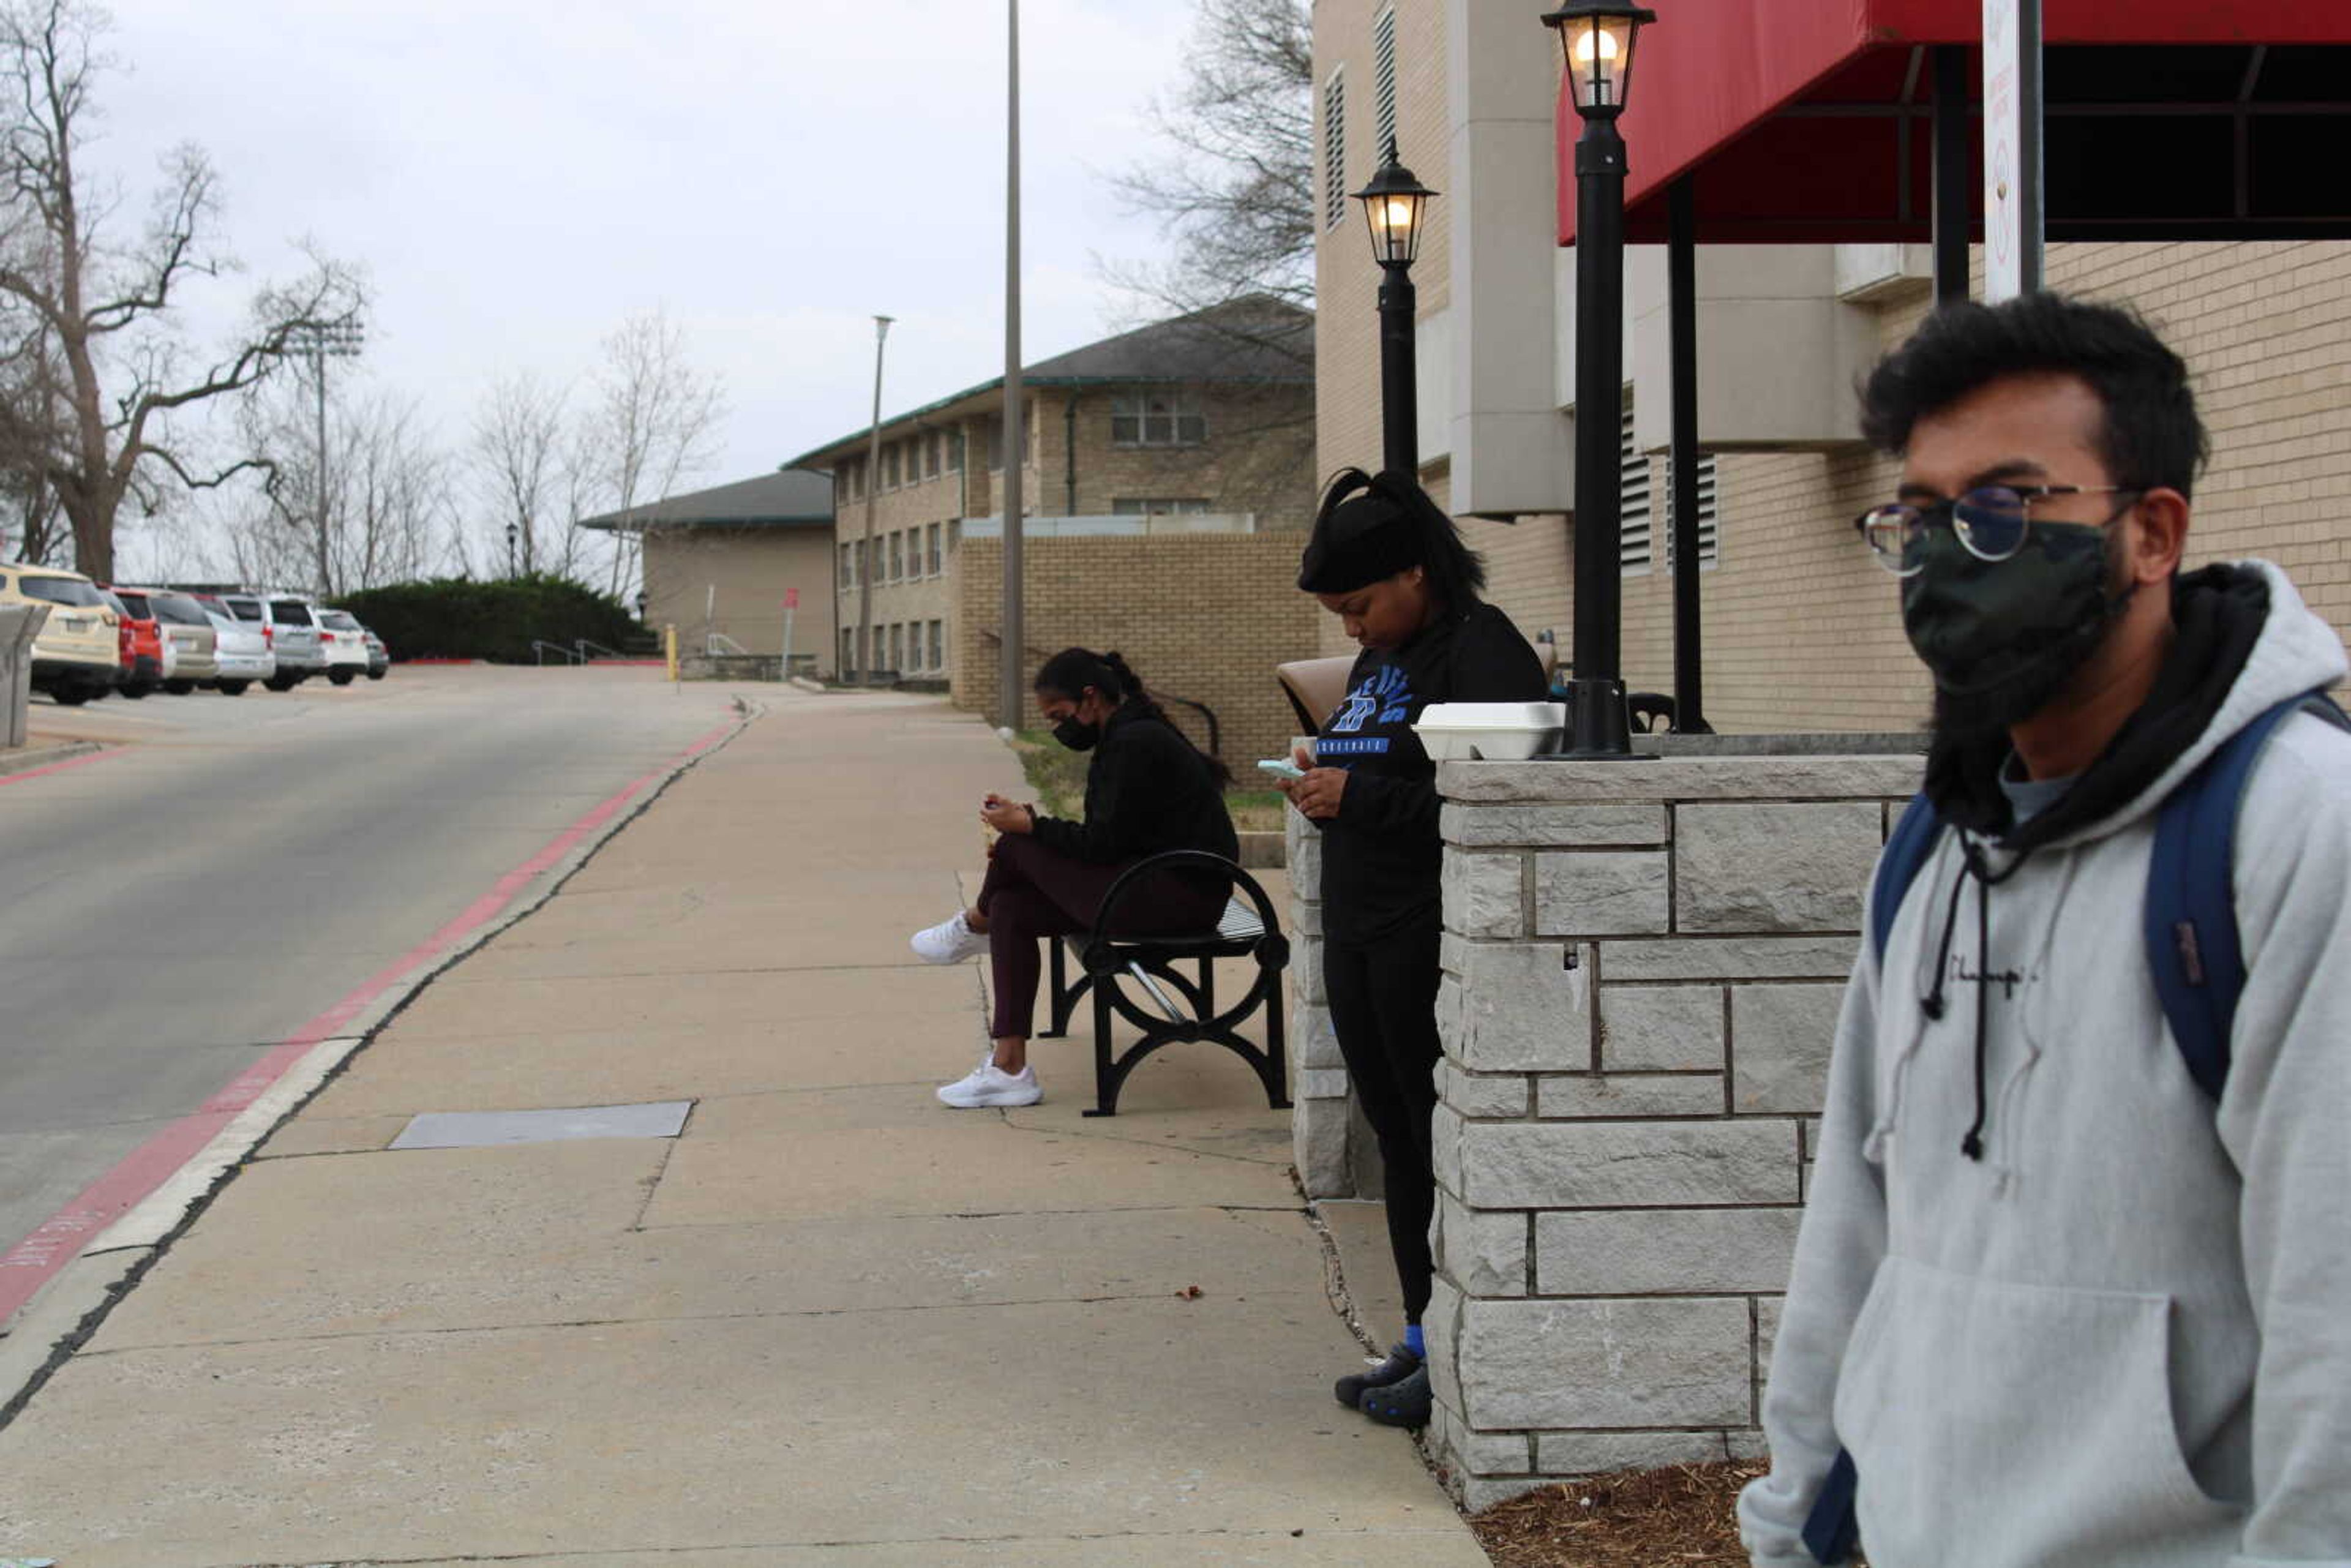 Ahmed Salehin waits outside the Starbucks on campus with two other students. He said he will often do homework there because it is the best place to see the bus. But with a tracking app, he said he would have more freedom to work out or go somewhere else.
